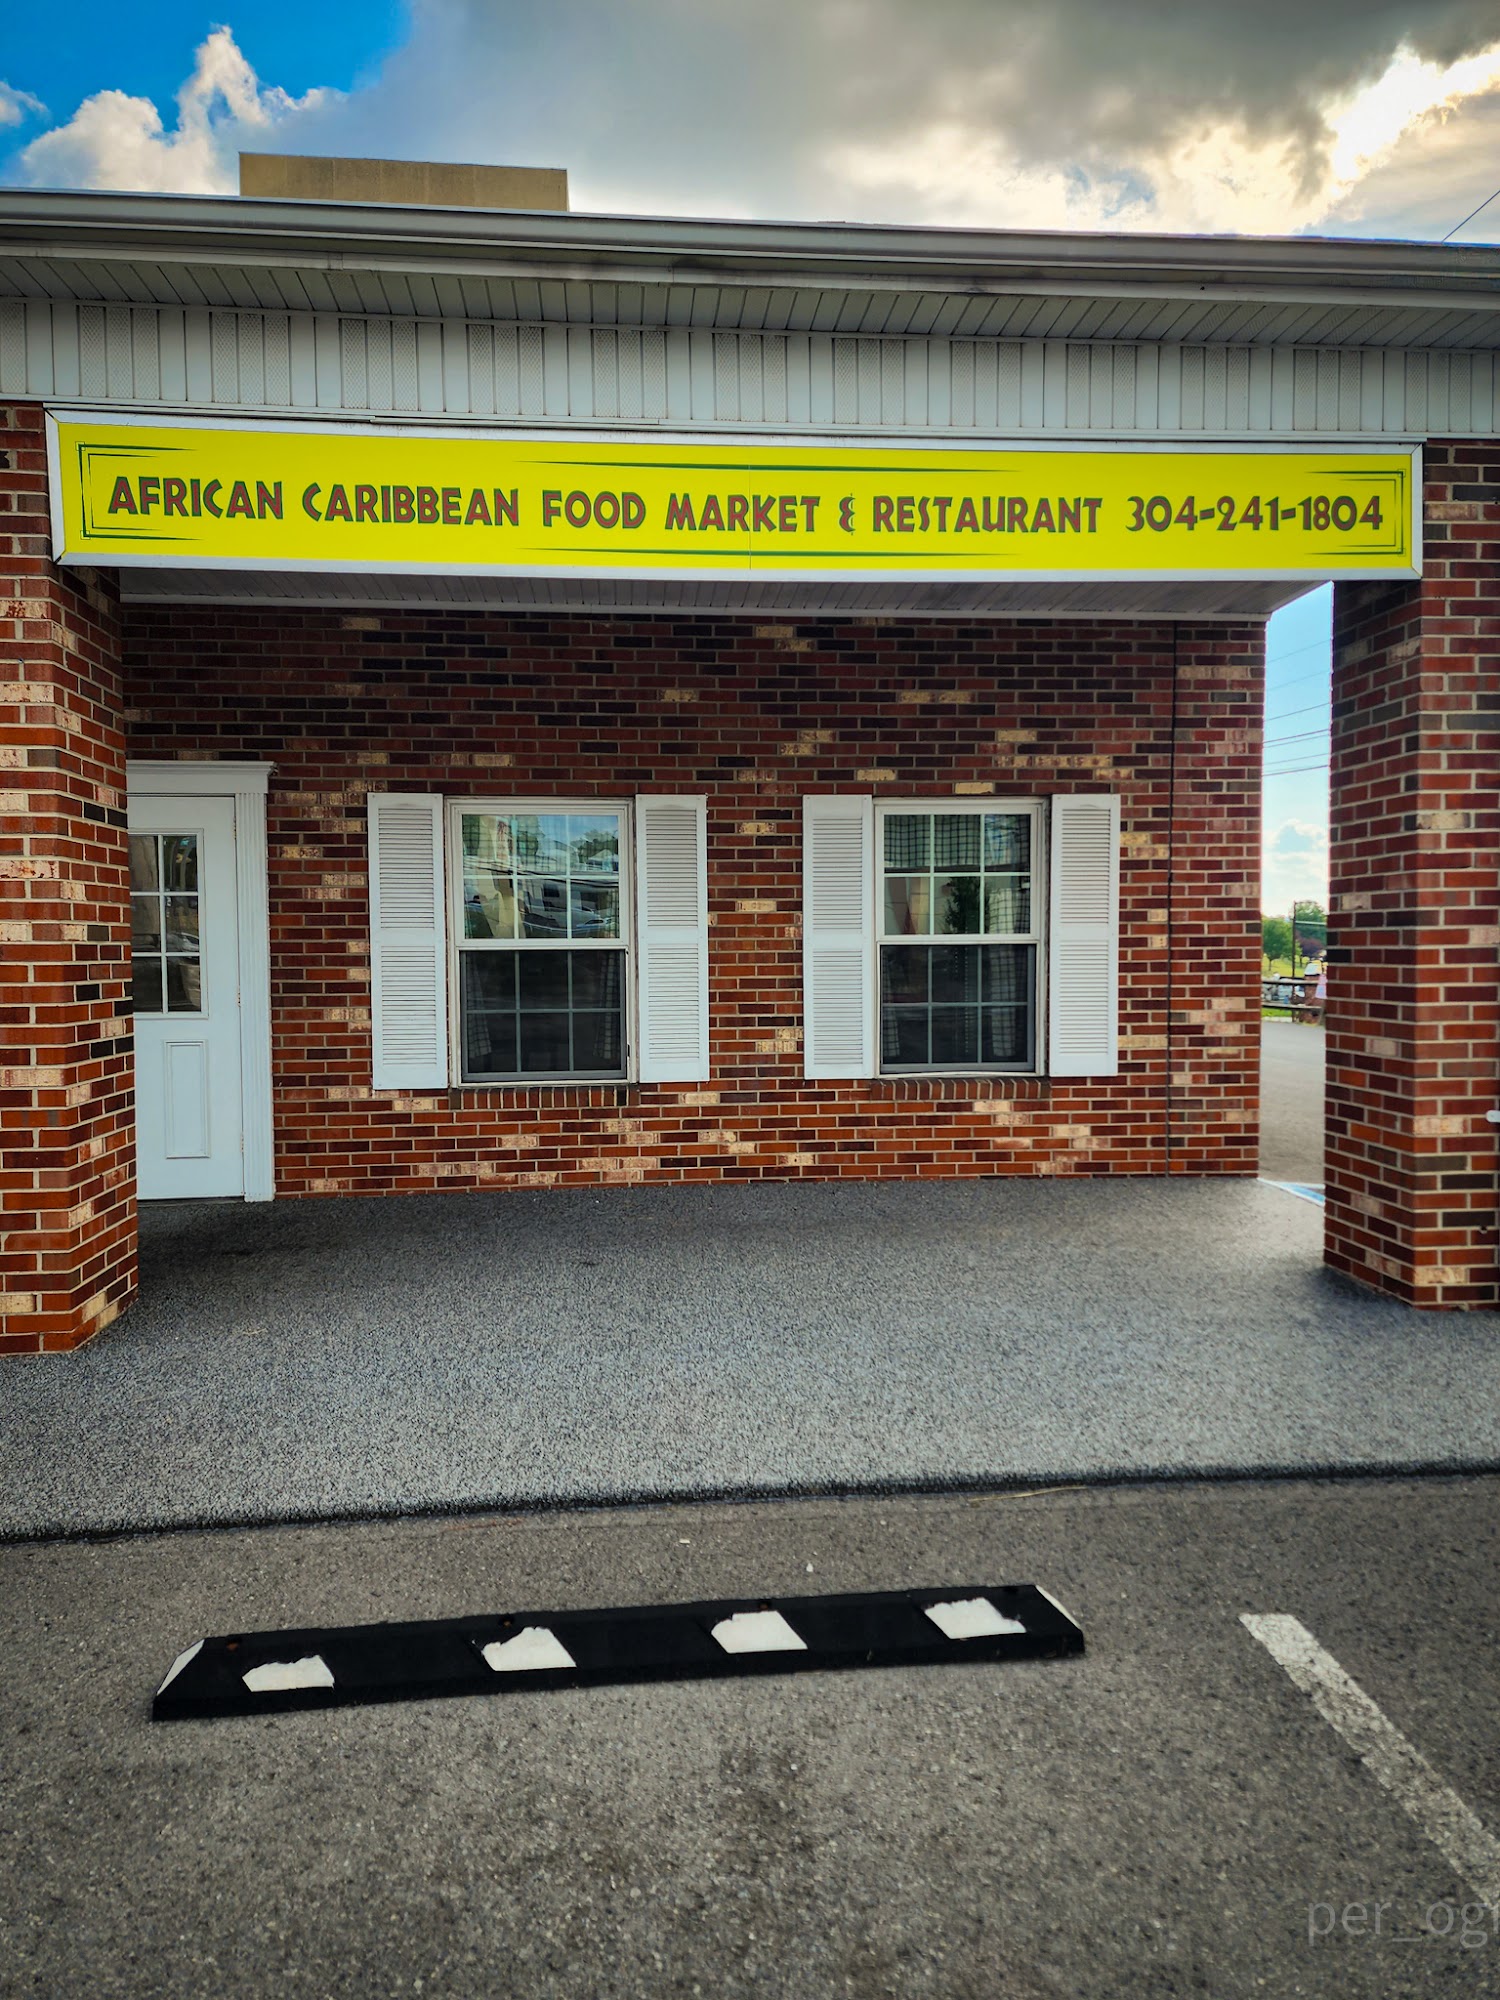 African Caribbean Food Market and Restaurant (Regions Services)